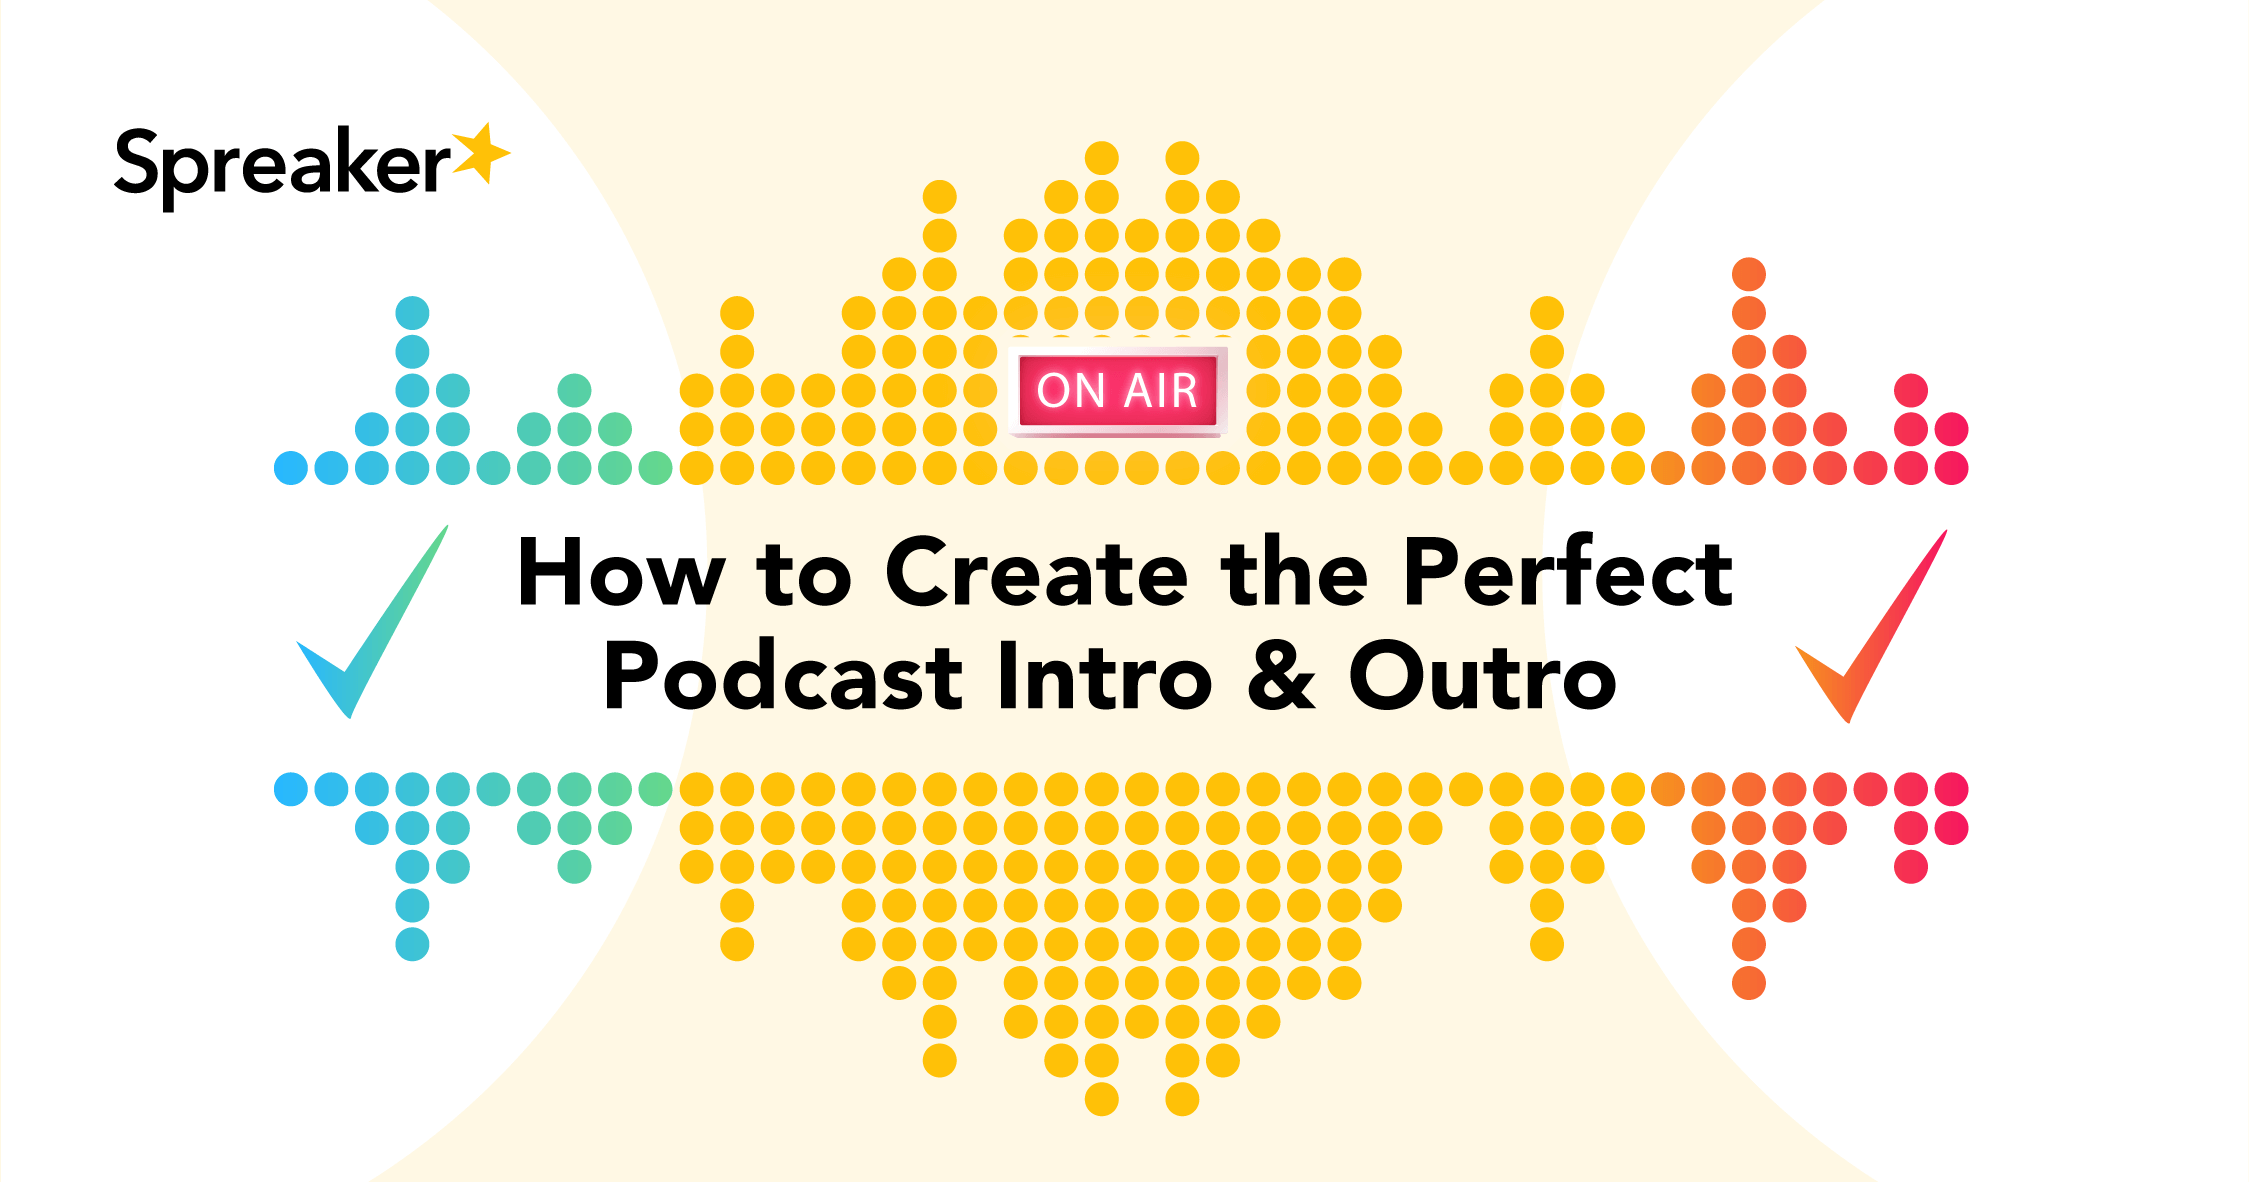 how-to-create-the-perfect-podcast-intro-outro-spreaker-blog